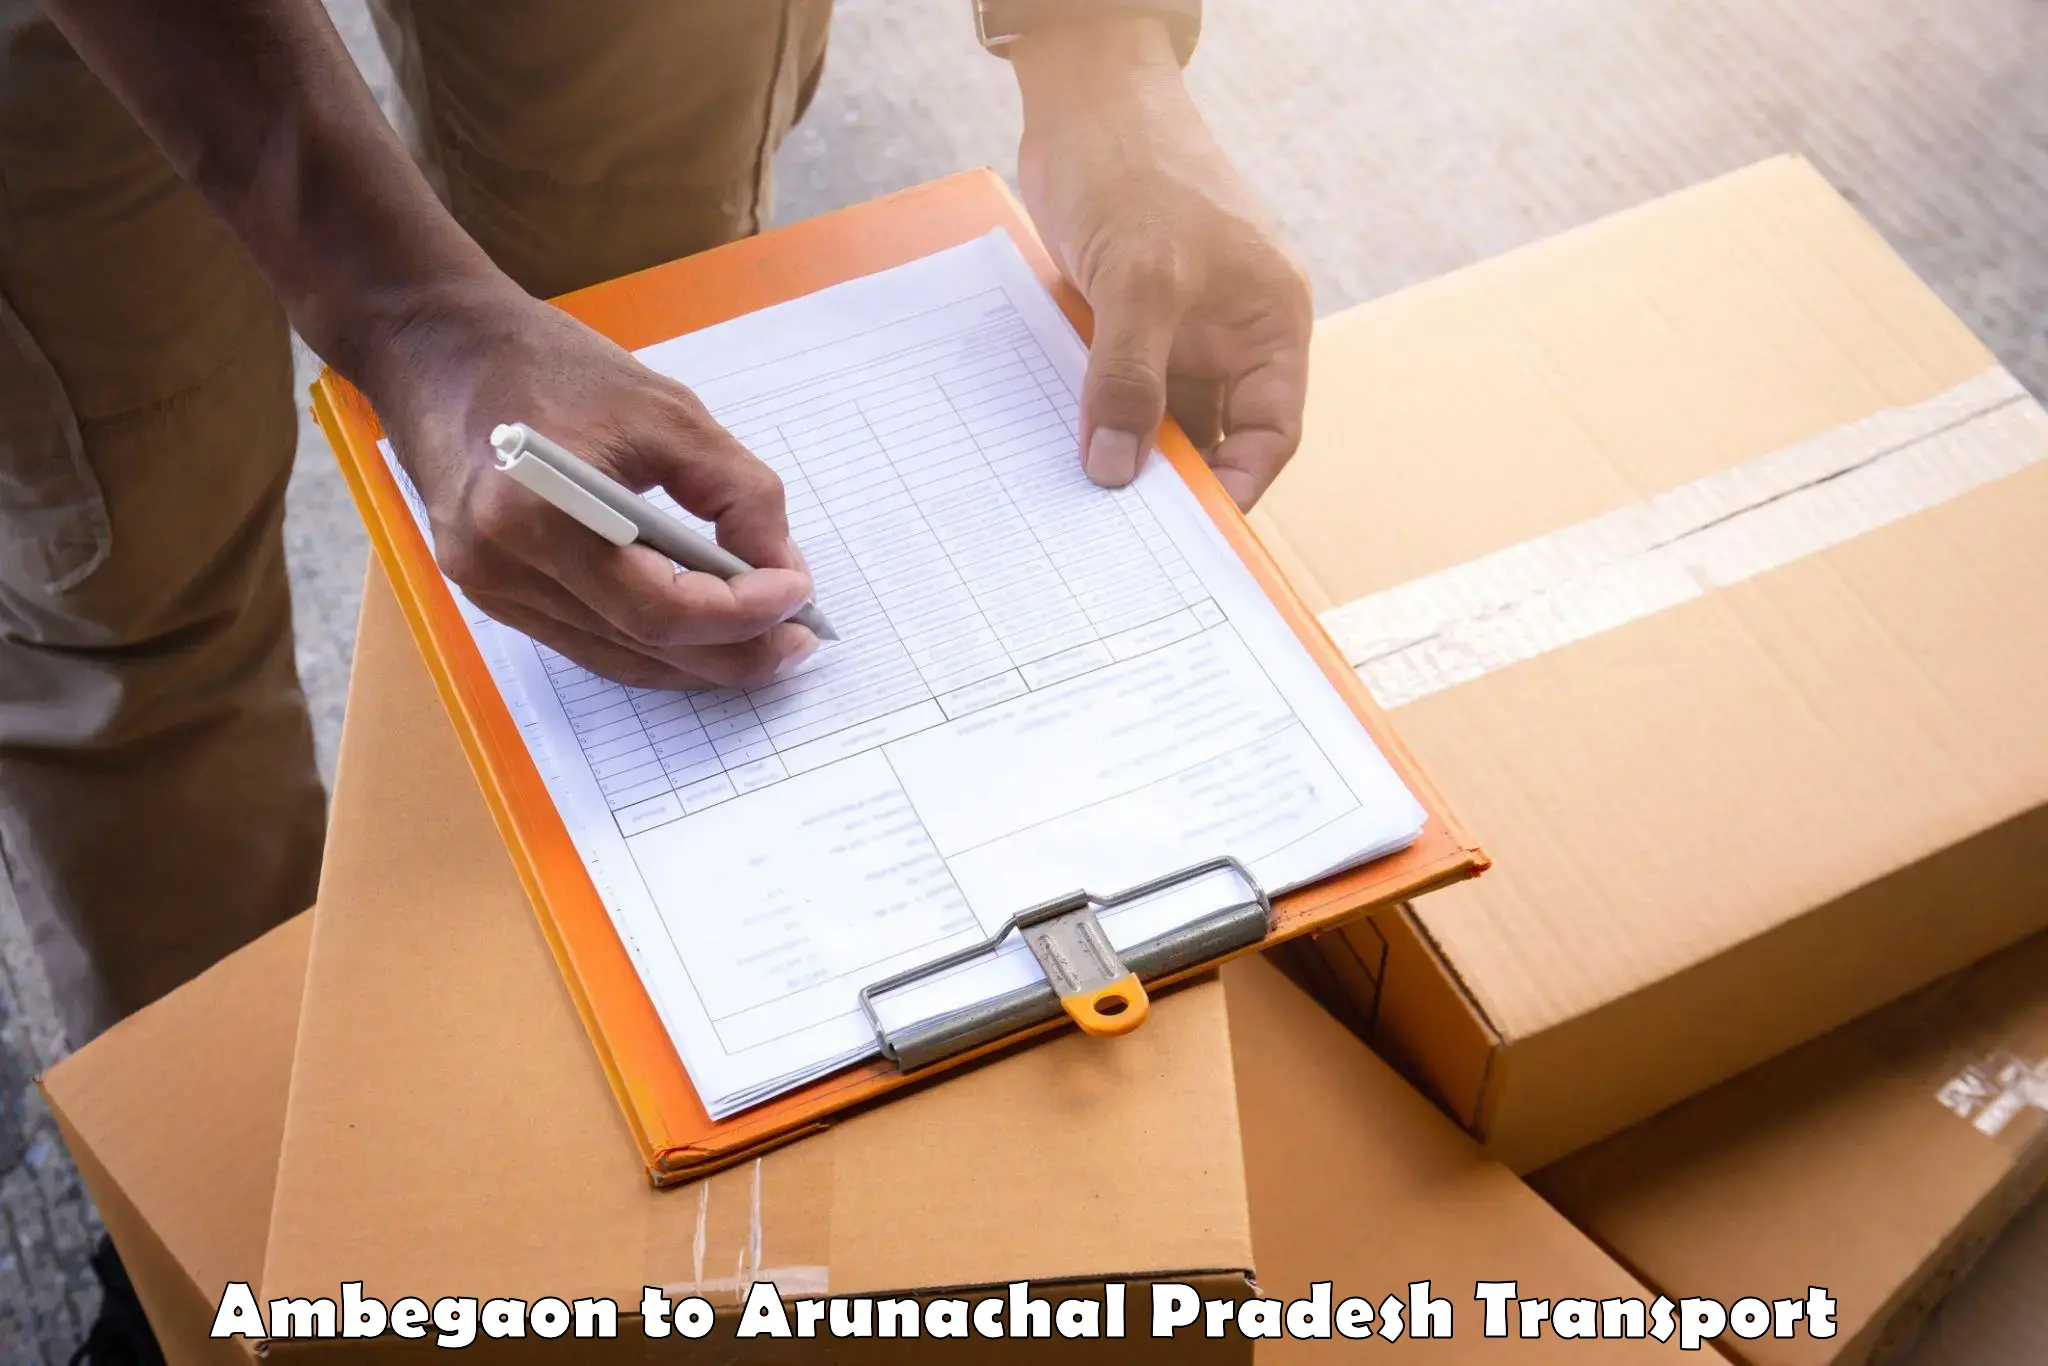 Truck transport companies in India in Ambegaon to Aalo